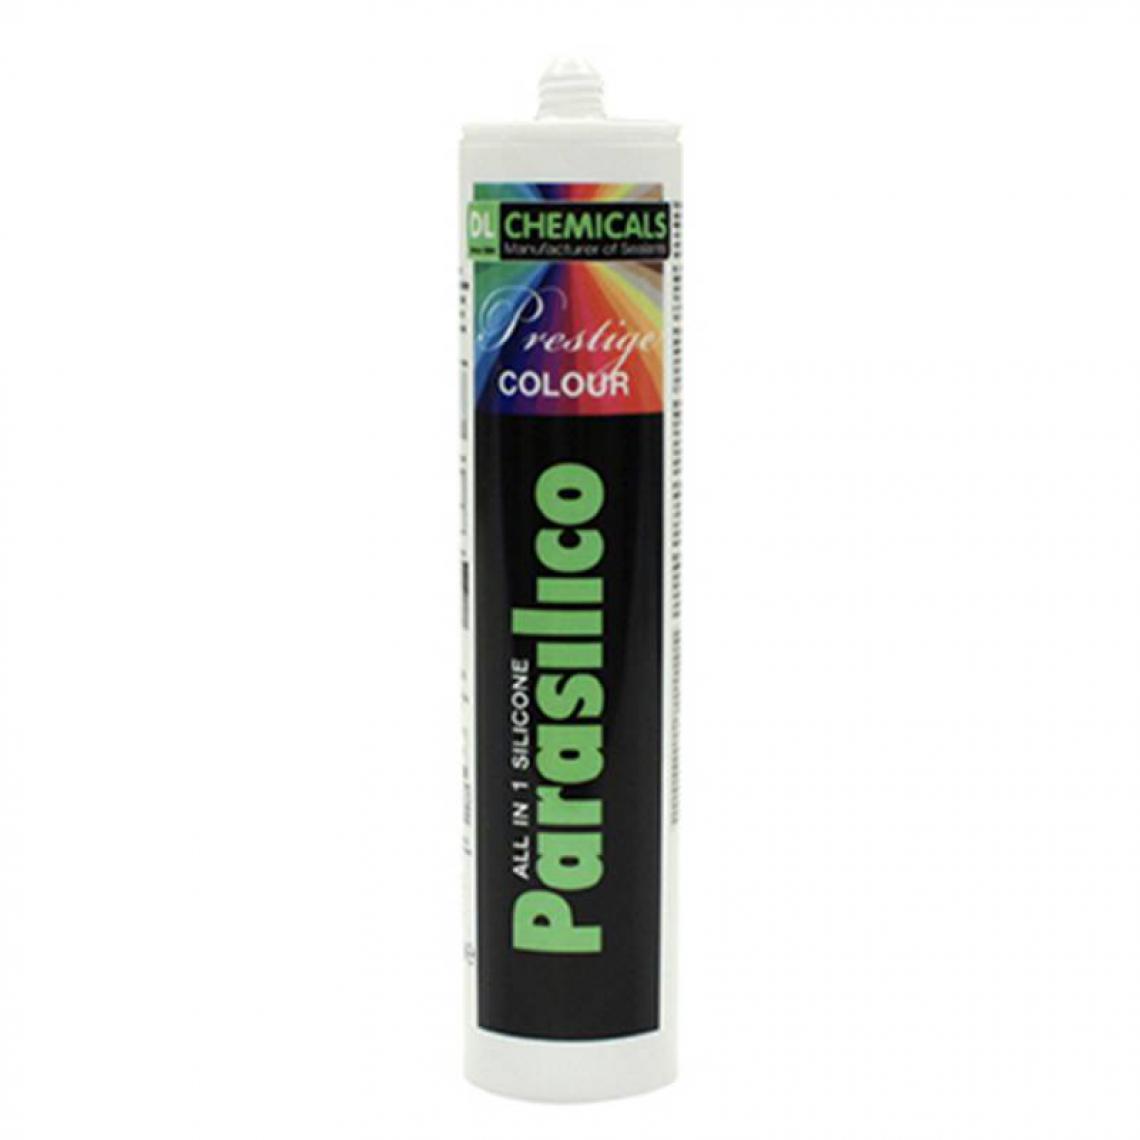 Dl Chemicals - Silicone Parasilico Prestige colour gris pigeon 300mL - Mastic, silicone, joint